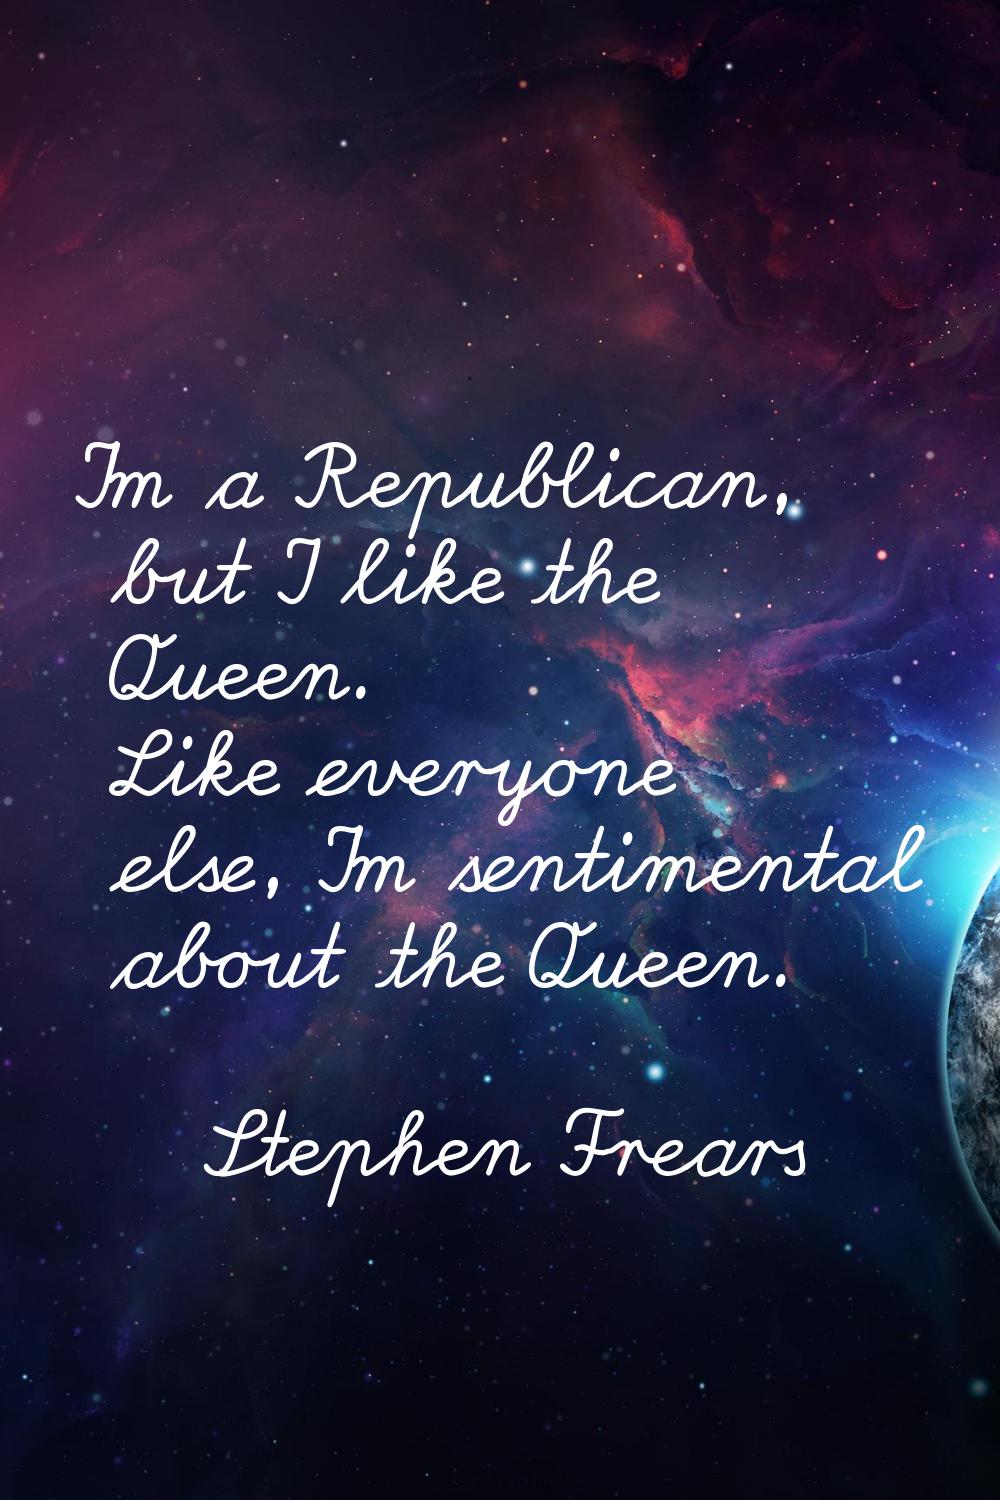 I'm a Republican, but I like the Queen. Like everyone else, I'm sentimental about the Queen.